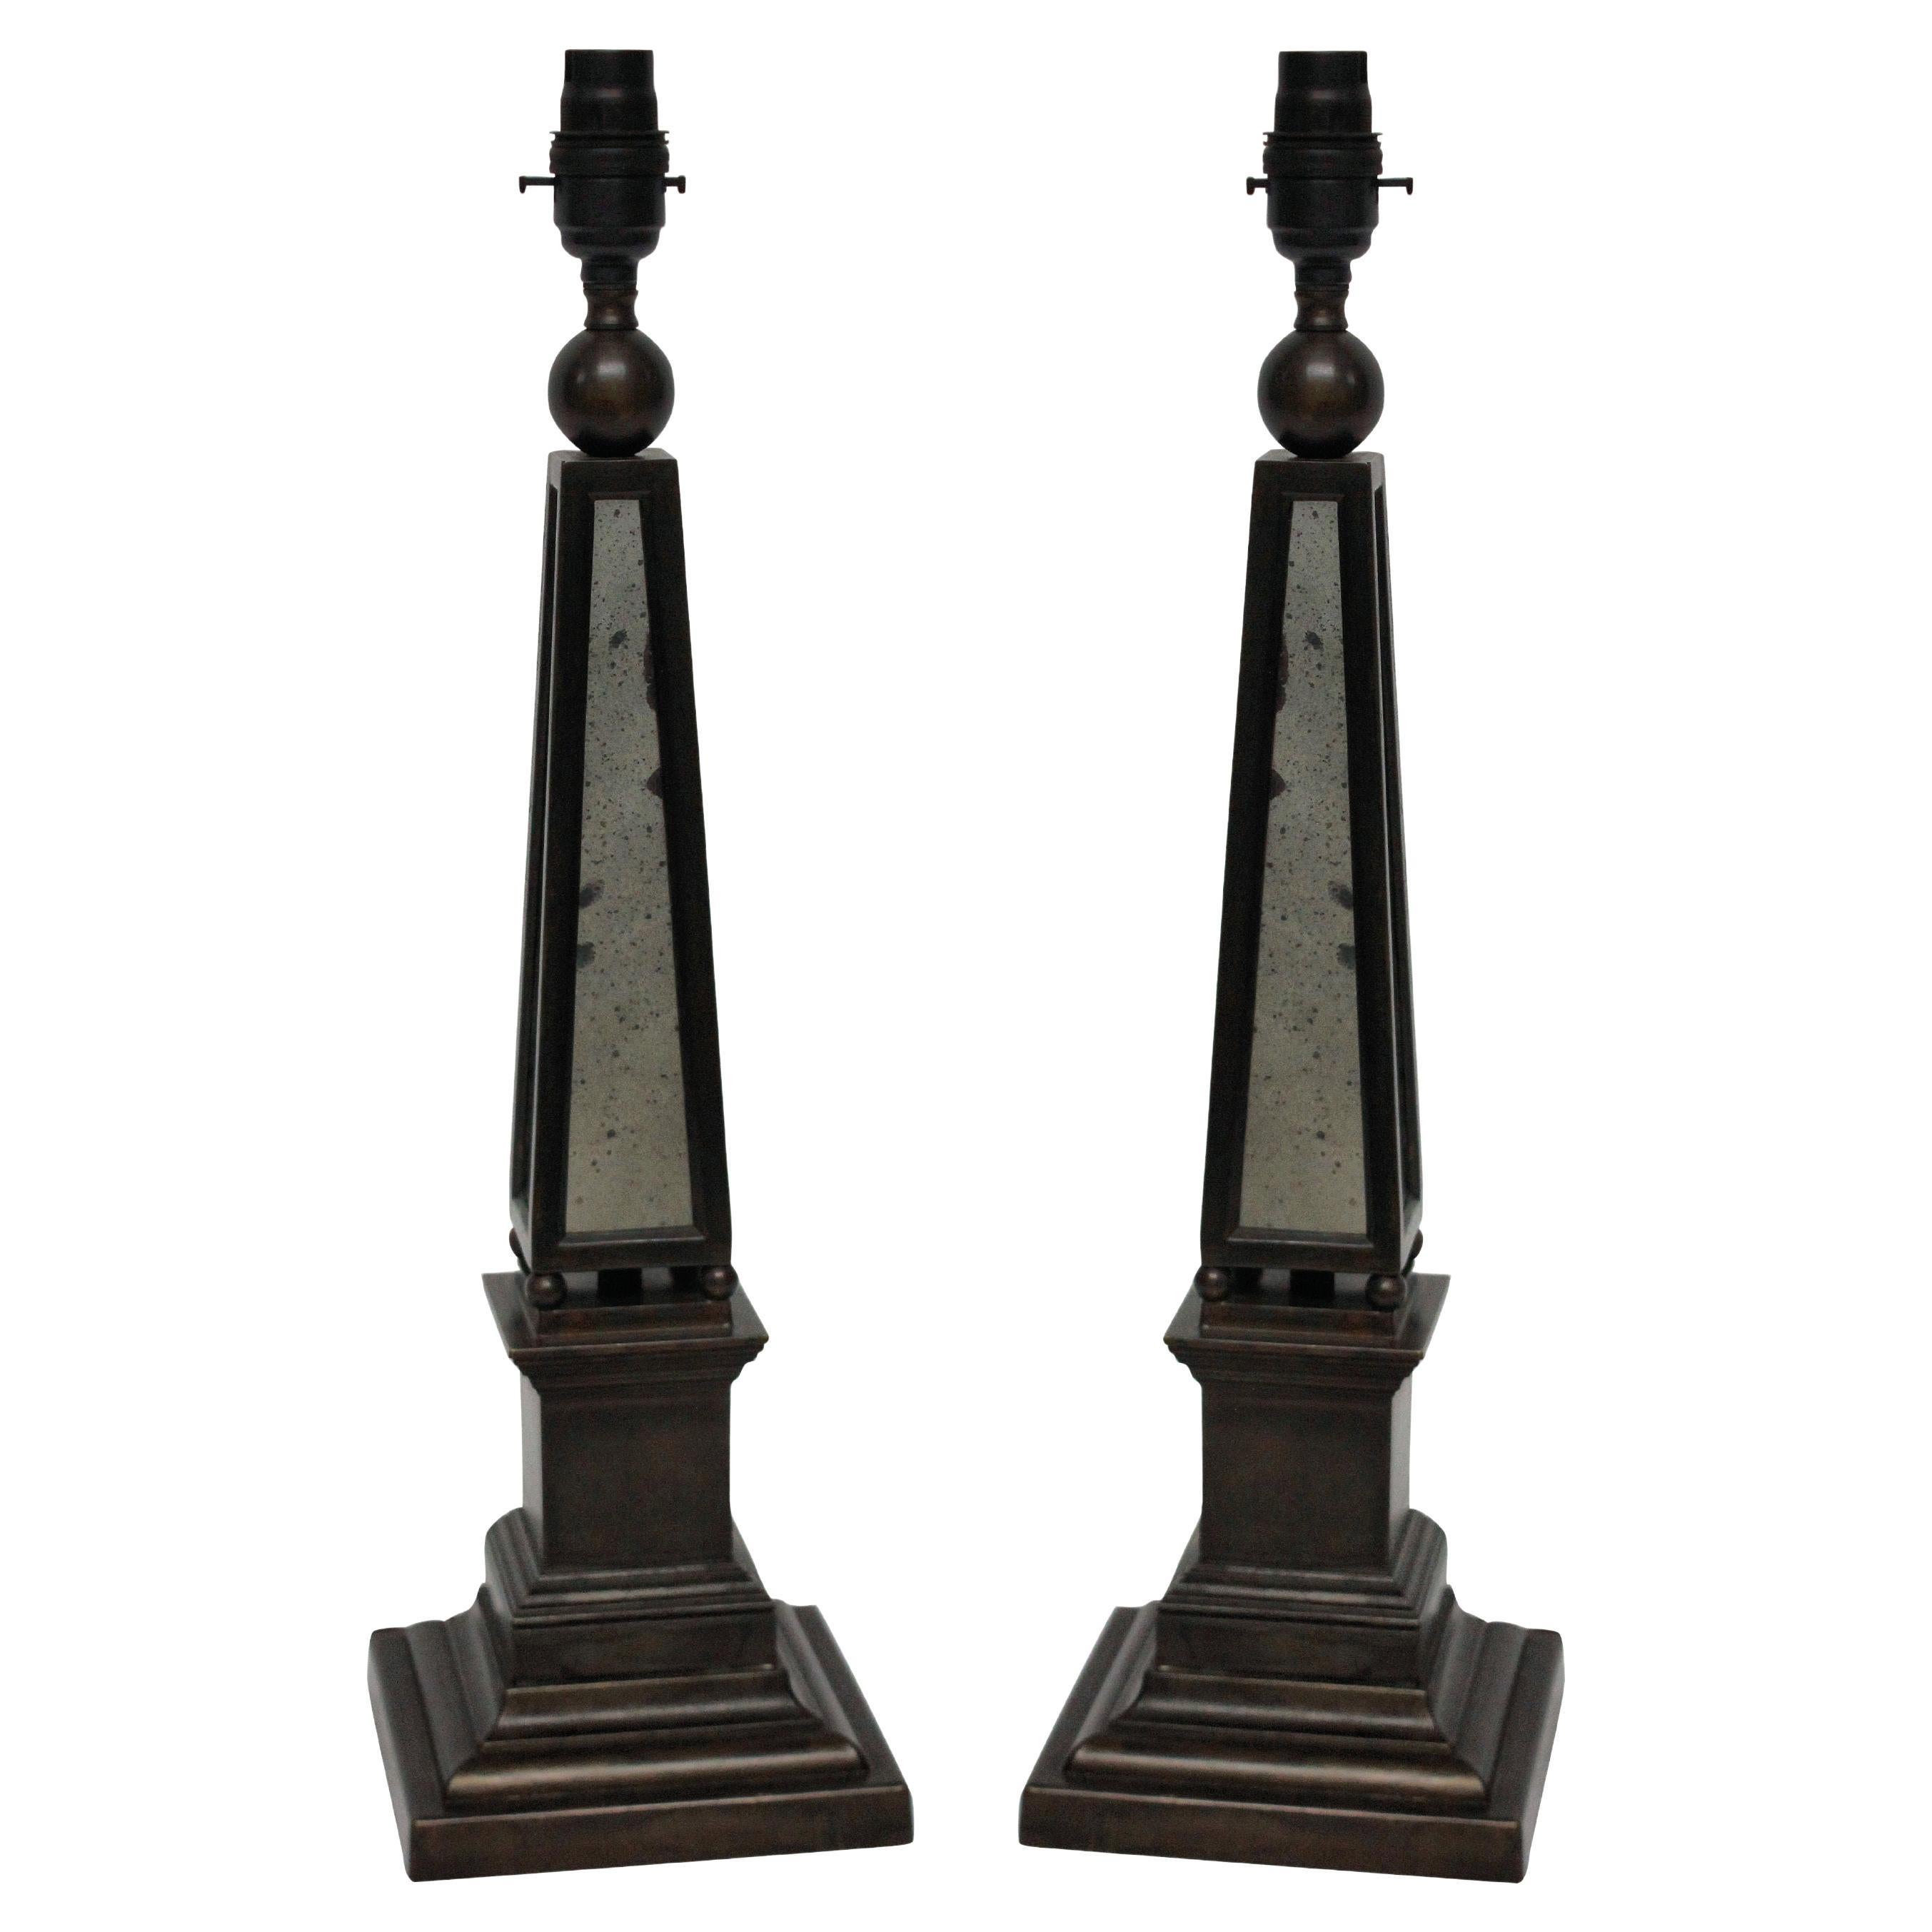 Pair of Obelisk Lamps with Mirror Panels